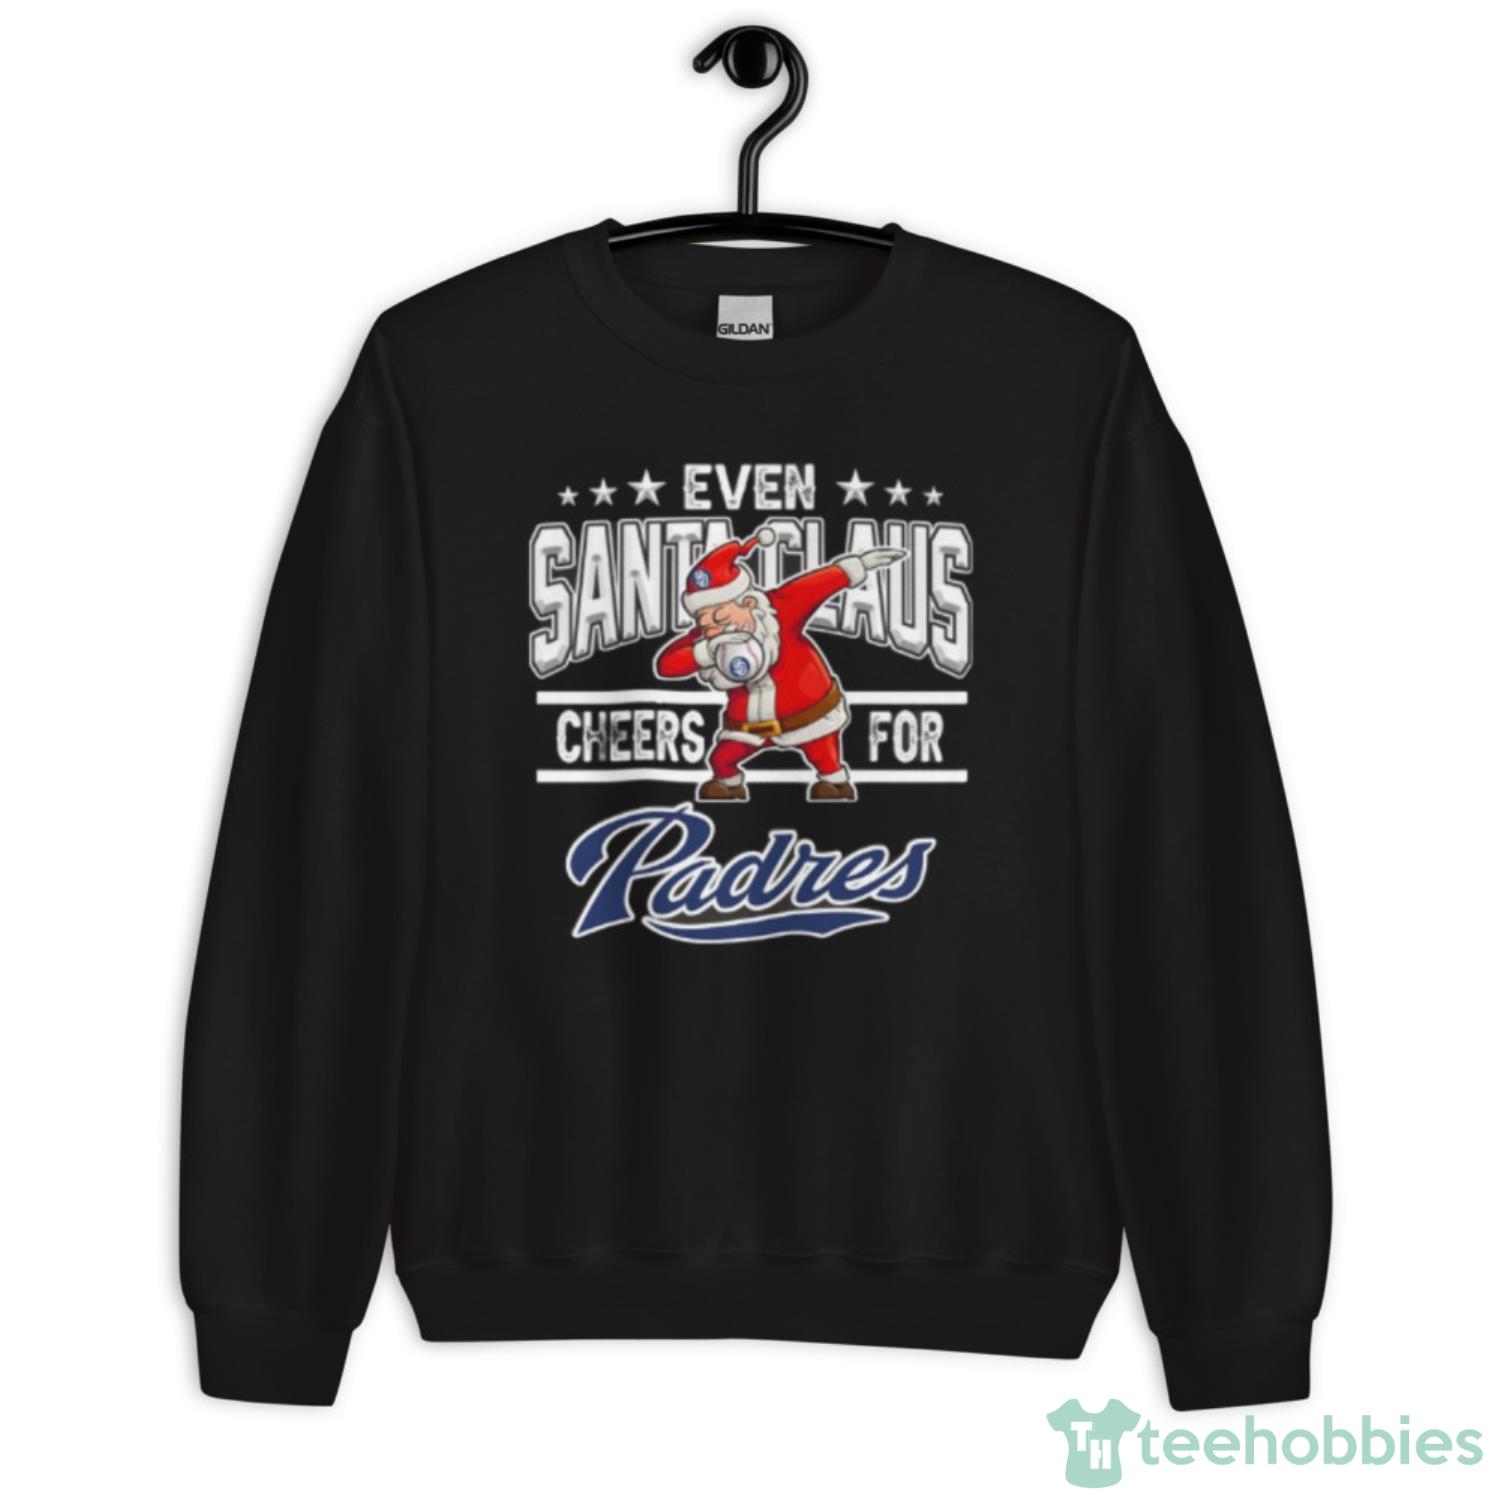 San Diego Padres Even Santa Claus Cheers For Christmas MLB Shirt For Fans